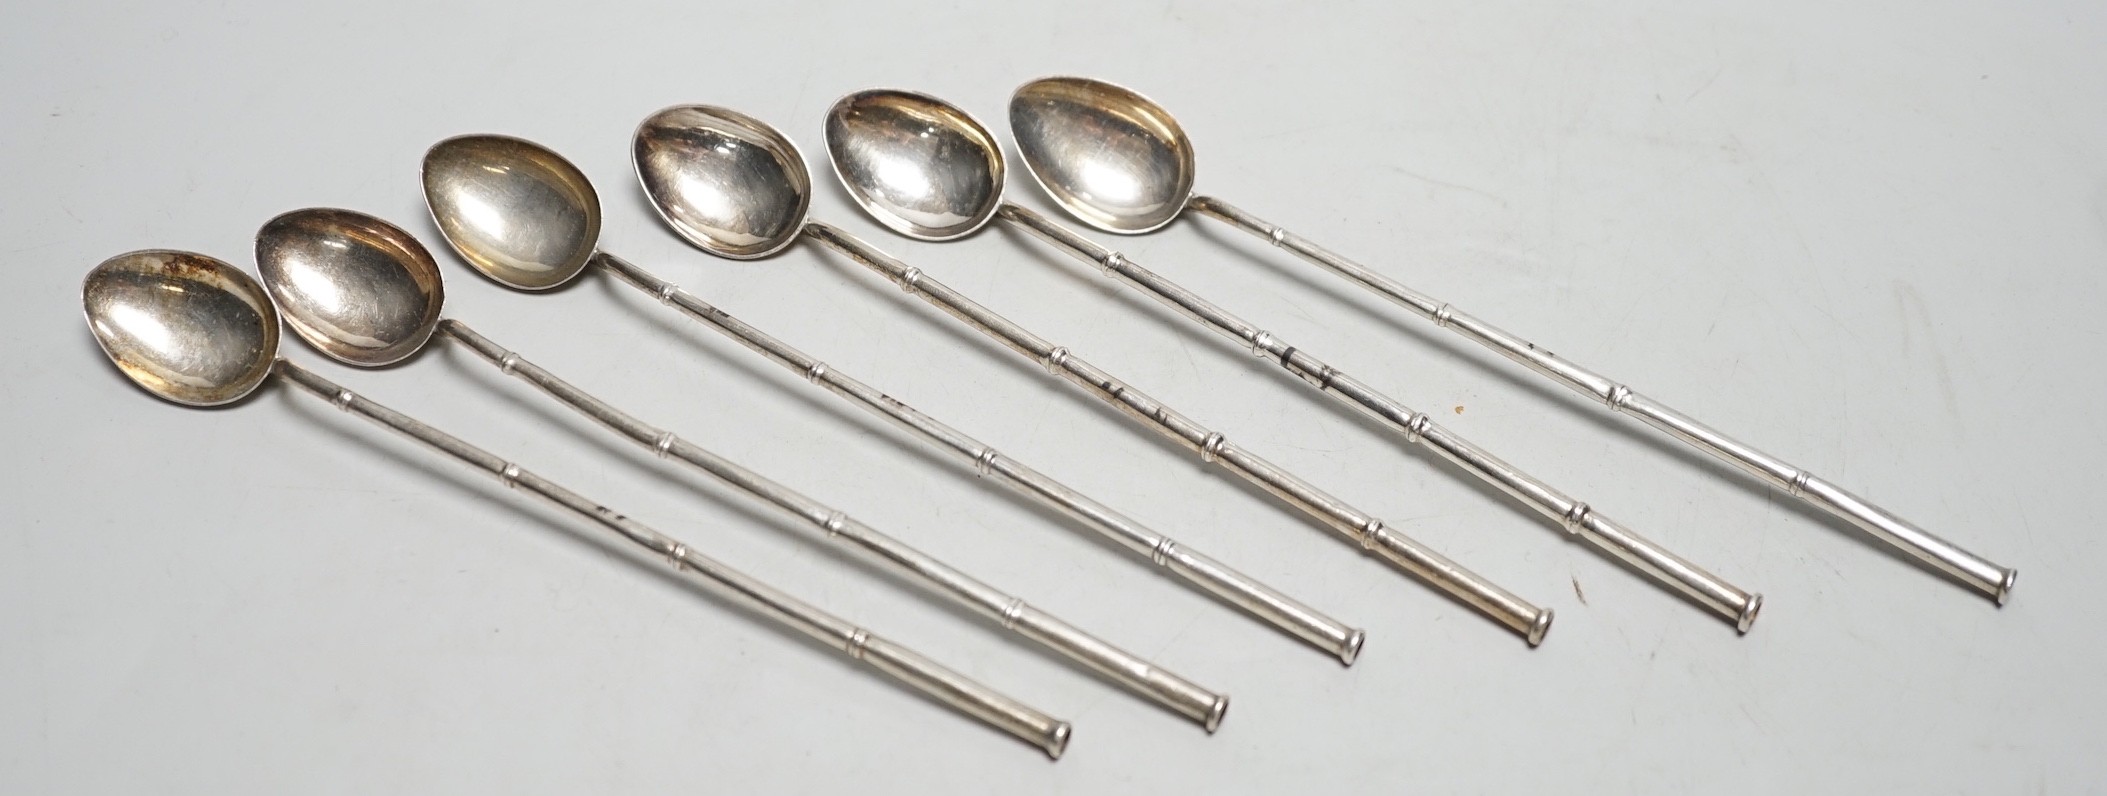 A set of six Chinese sterling cocktail straw spoons, 19.4 cm.